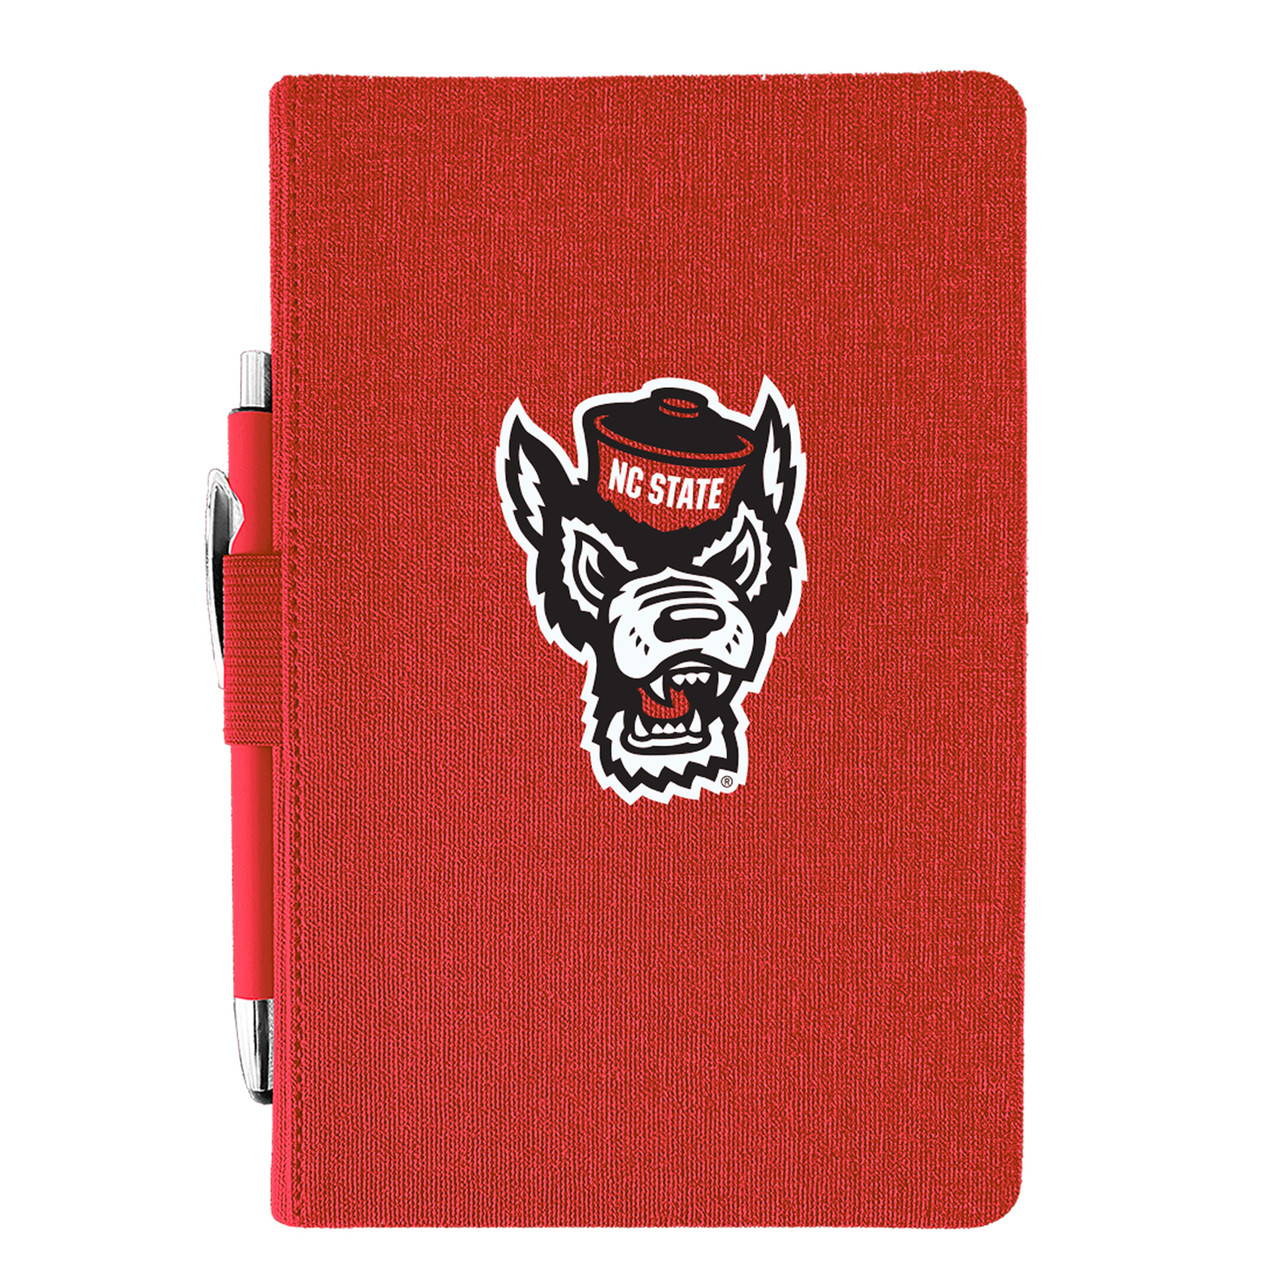 NC State Wolfpack Journal with Pen